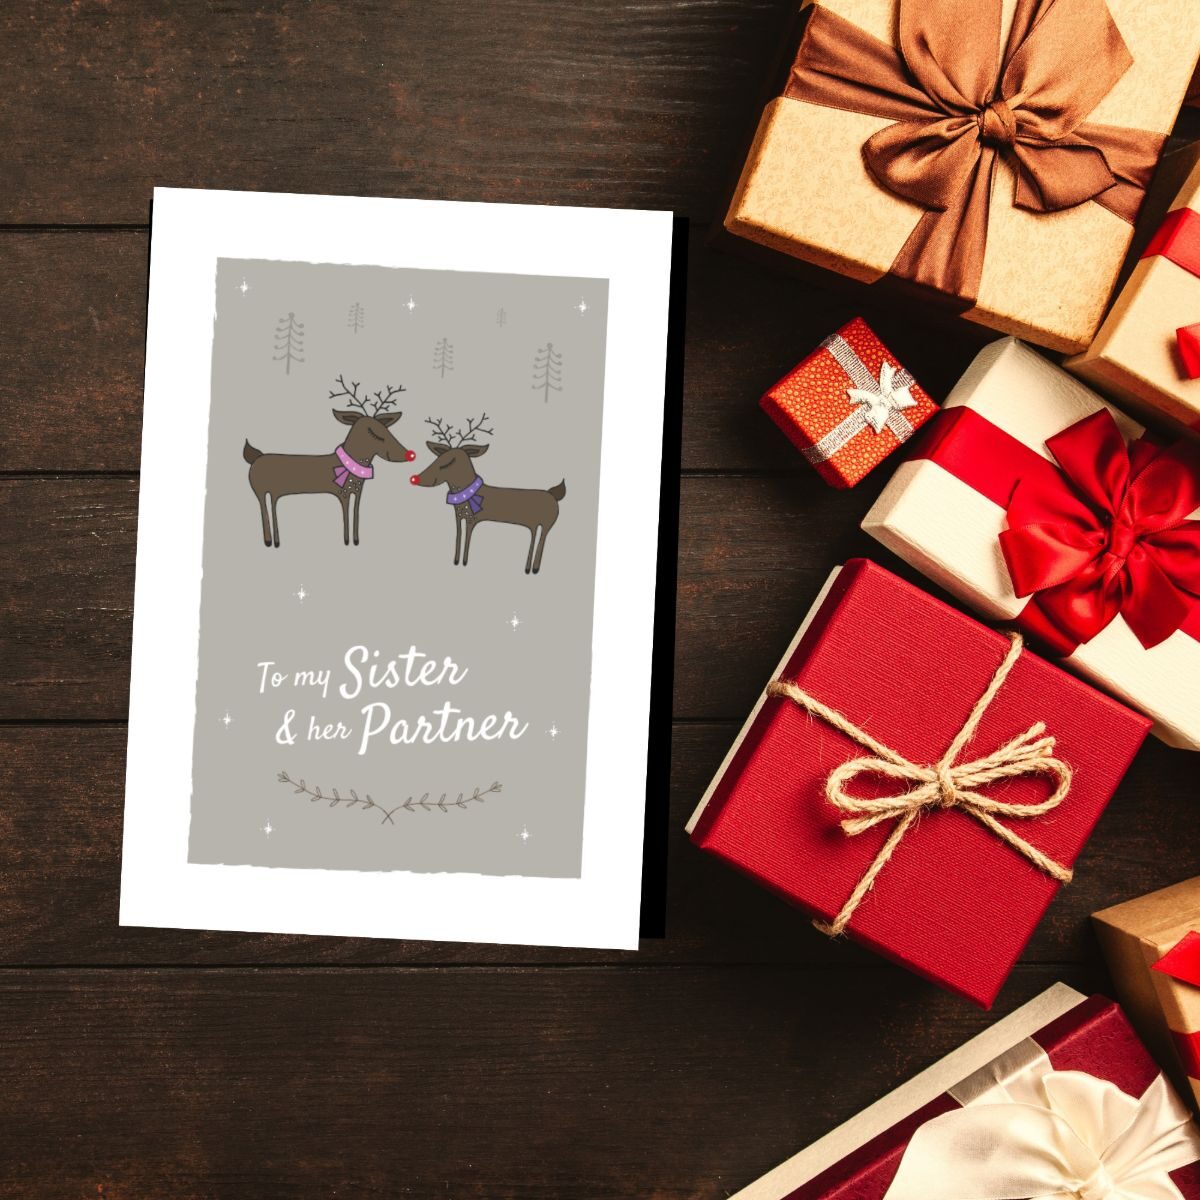 To my Lesbian Sister and her Partner Christmas Card Reindeer